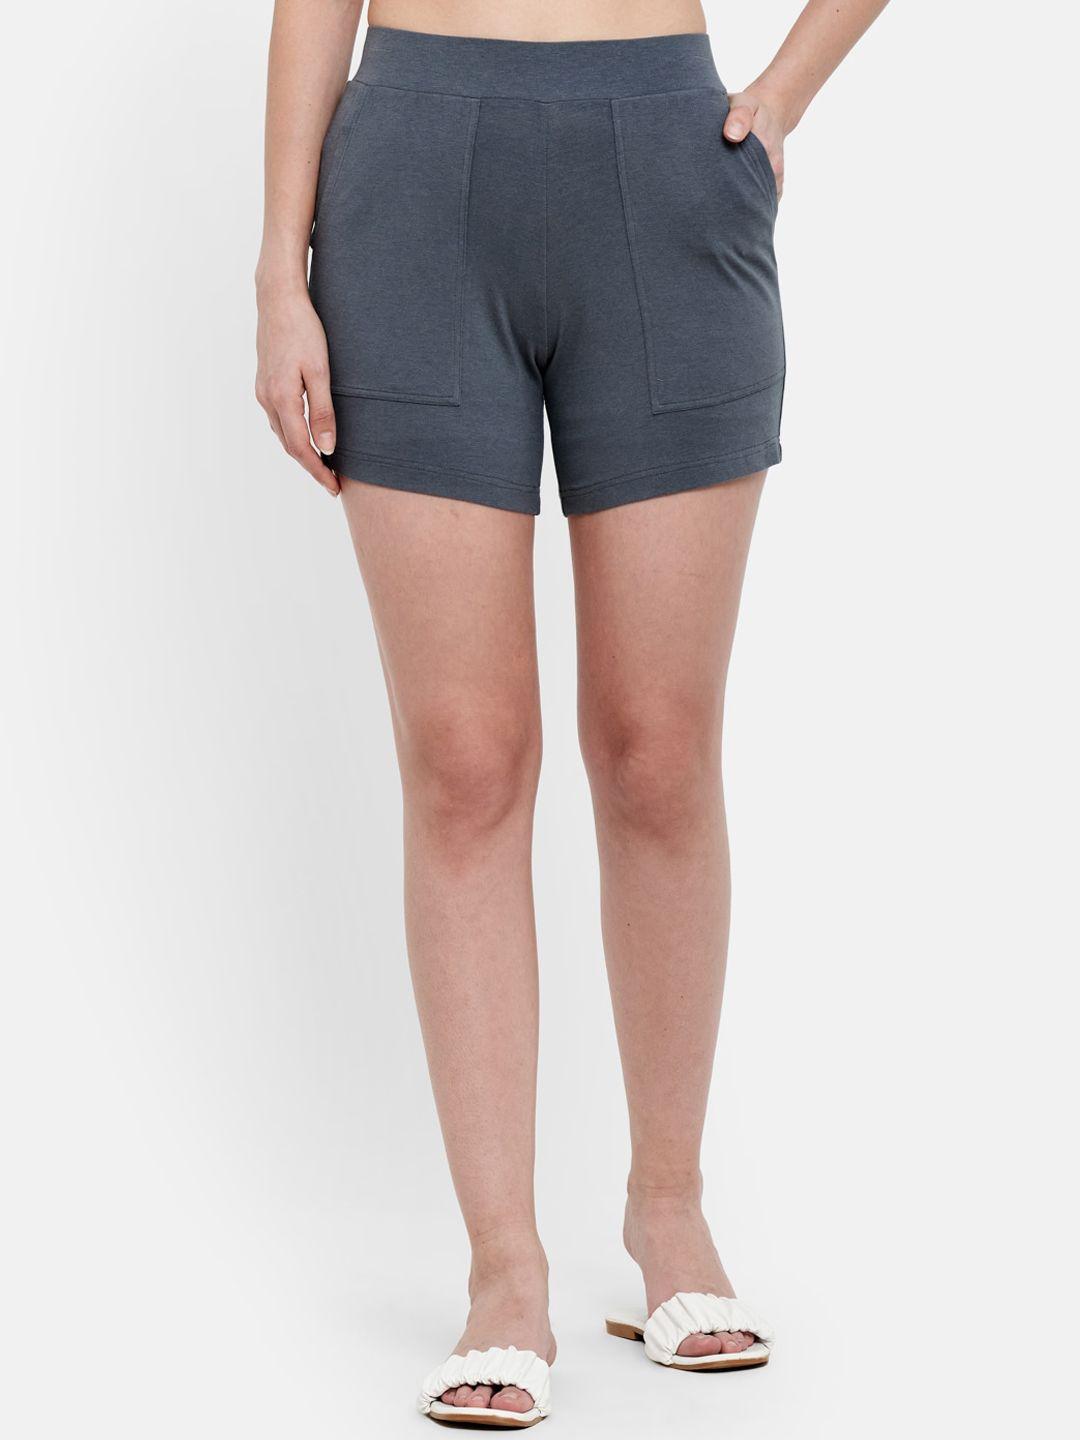 unmade women charcoal grey pure cotton shorts